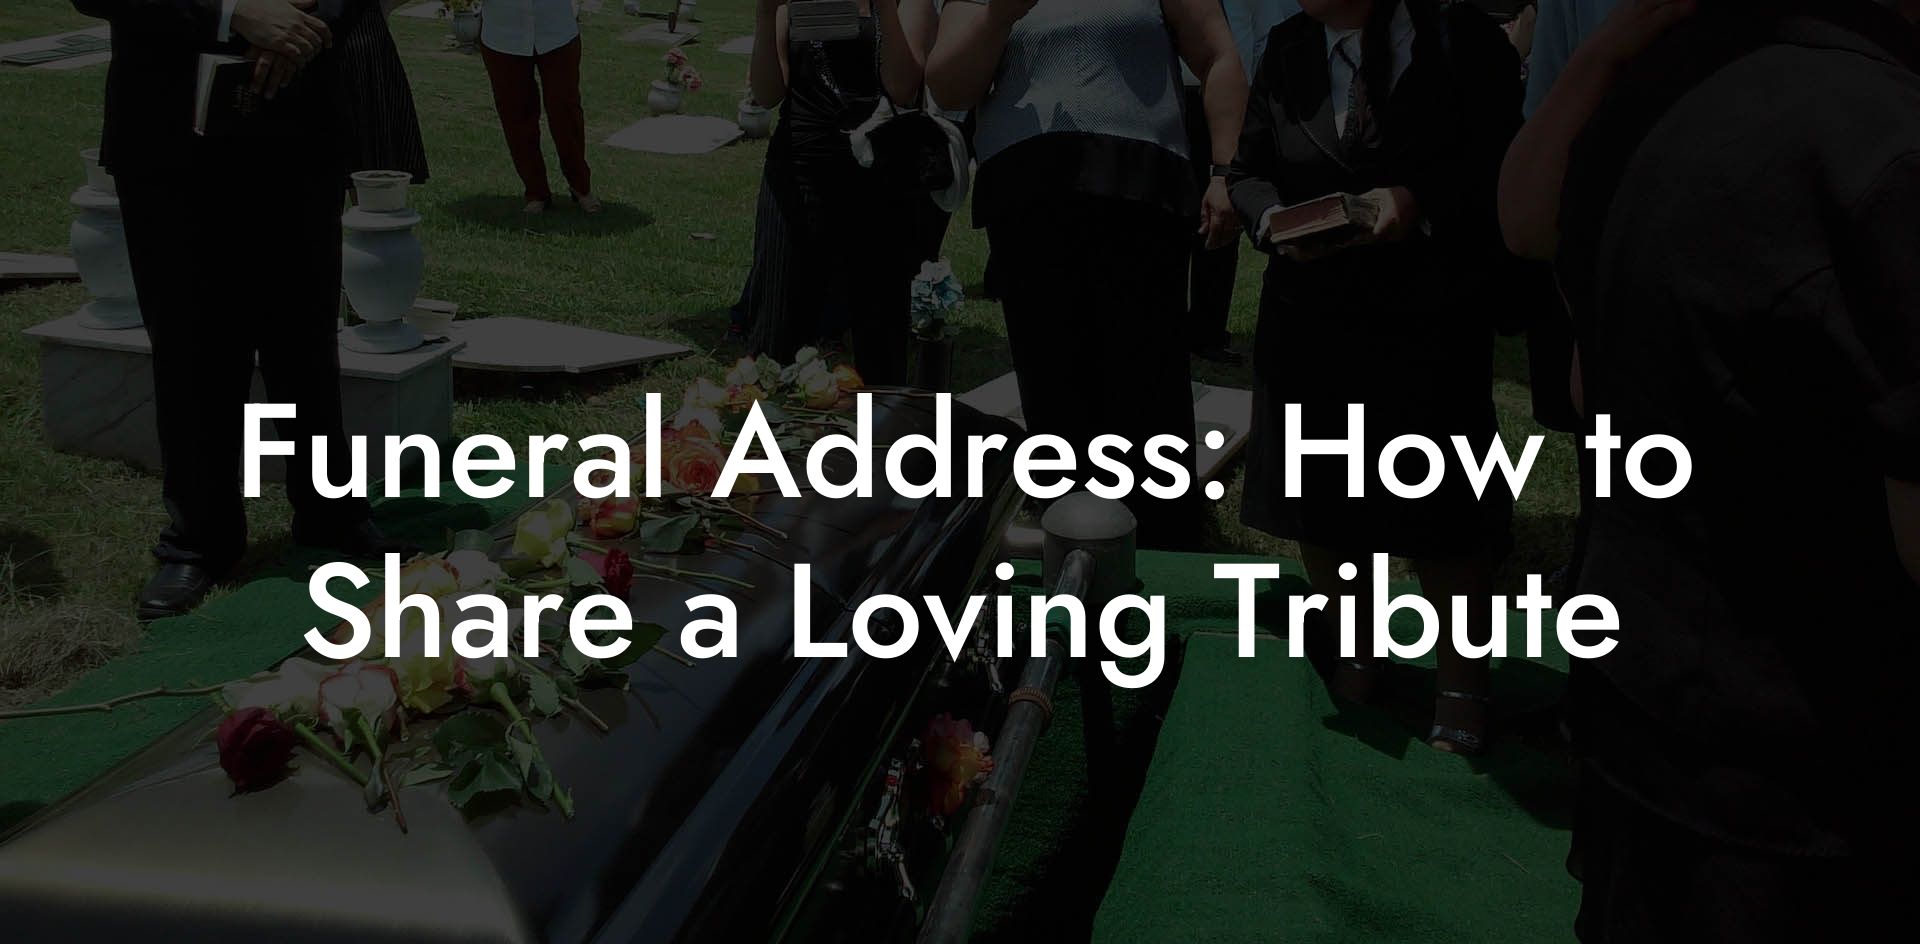 Funeral Address: How to Share a Loving Tribute